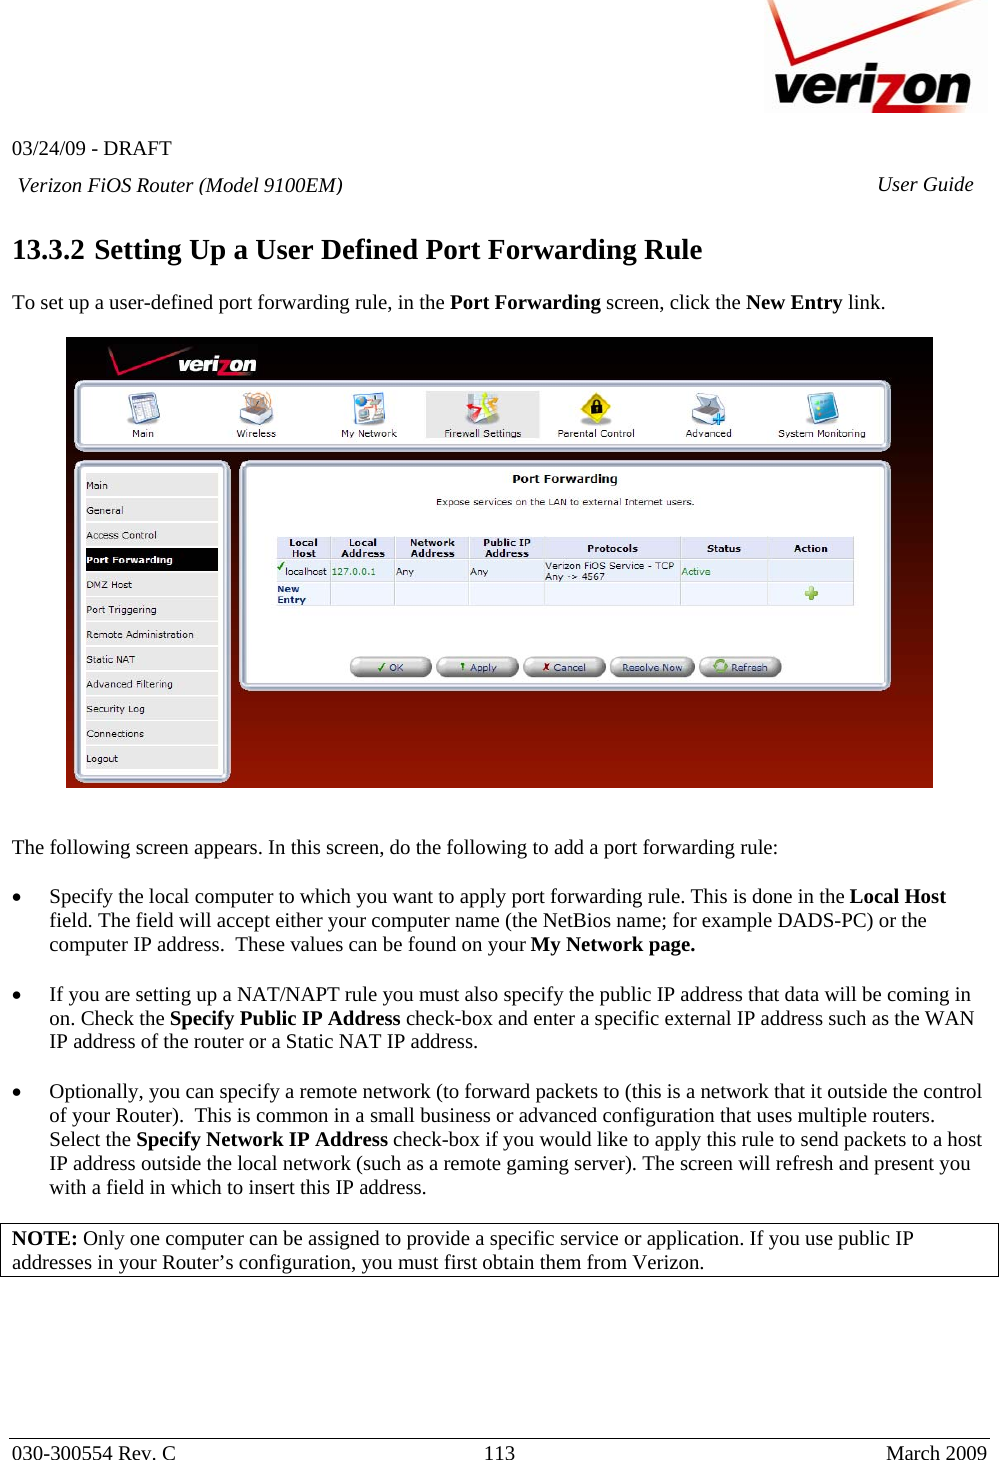   03/24/09 - DRAFT   030-300554 Rev. C  113      March 2009  Verizon FiOS Router (Model 9100EM) User Guide 13.3.2  Setting Up a User Defined Port Forwarding Rule  To set up a user-defined port forwarding rule, in the Port Forwarding screen, click the New Entry link.      The following screen appears. In this screen, do the following to add a port forwarding rule:  • Specify the local computer to which you want to apply port forwarding rule. This is done in the Local Host field. The field will accept either your computer name (the NetBios name; for example DADS-PC) or the computer IP address.  These values can be found on your My Network page.    • If you are setting up a NAT/NAPT rule you must also specify the public IP address that data will be coming in on. Check the Specify Public IP Address check-box and enter a specific external IP address such as the WAN IP address of the router or a Static NAT IP address.   • Optionally, you can specify a remote network (to forward packets to (this is a network that it outside the control of your Router).  This is common in a small business or advanced configuration that uses multiple routers.  Select the Specify Network IP Address check-box if you would like to apply this rule to send packets to a host IP address outside the local network (such as a remote gaming server). The screen will refresh and present you with a field in which to insert this IP address.  NOTE: Only one computer can be assigned to provide a specific service or application. If you use public IP addresses in your Router’s configuration, you must first obtain them from Verizon.   